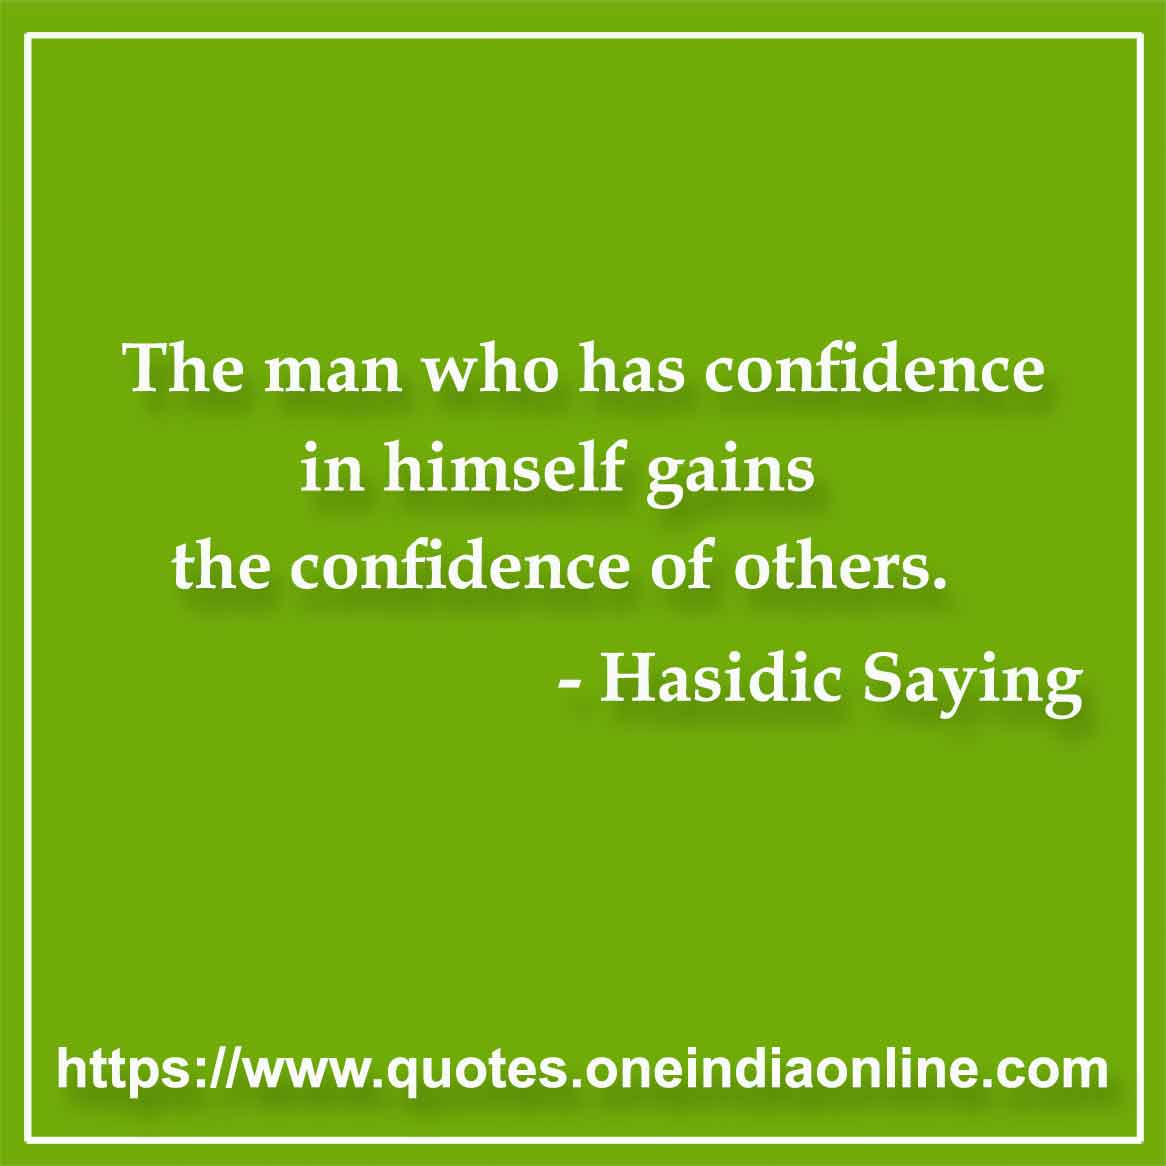 The man who has confidence in himself gains the confidence of others. 

-  by Hasidic Saying